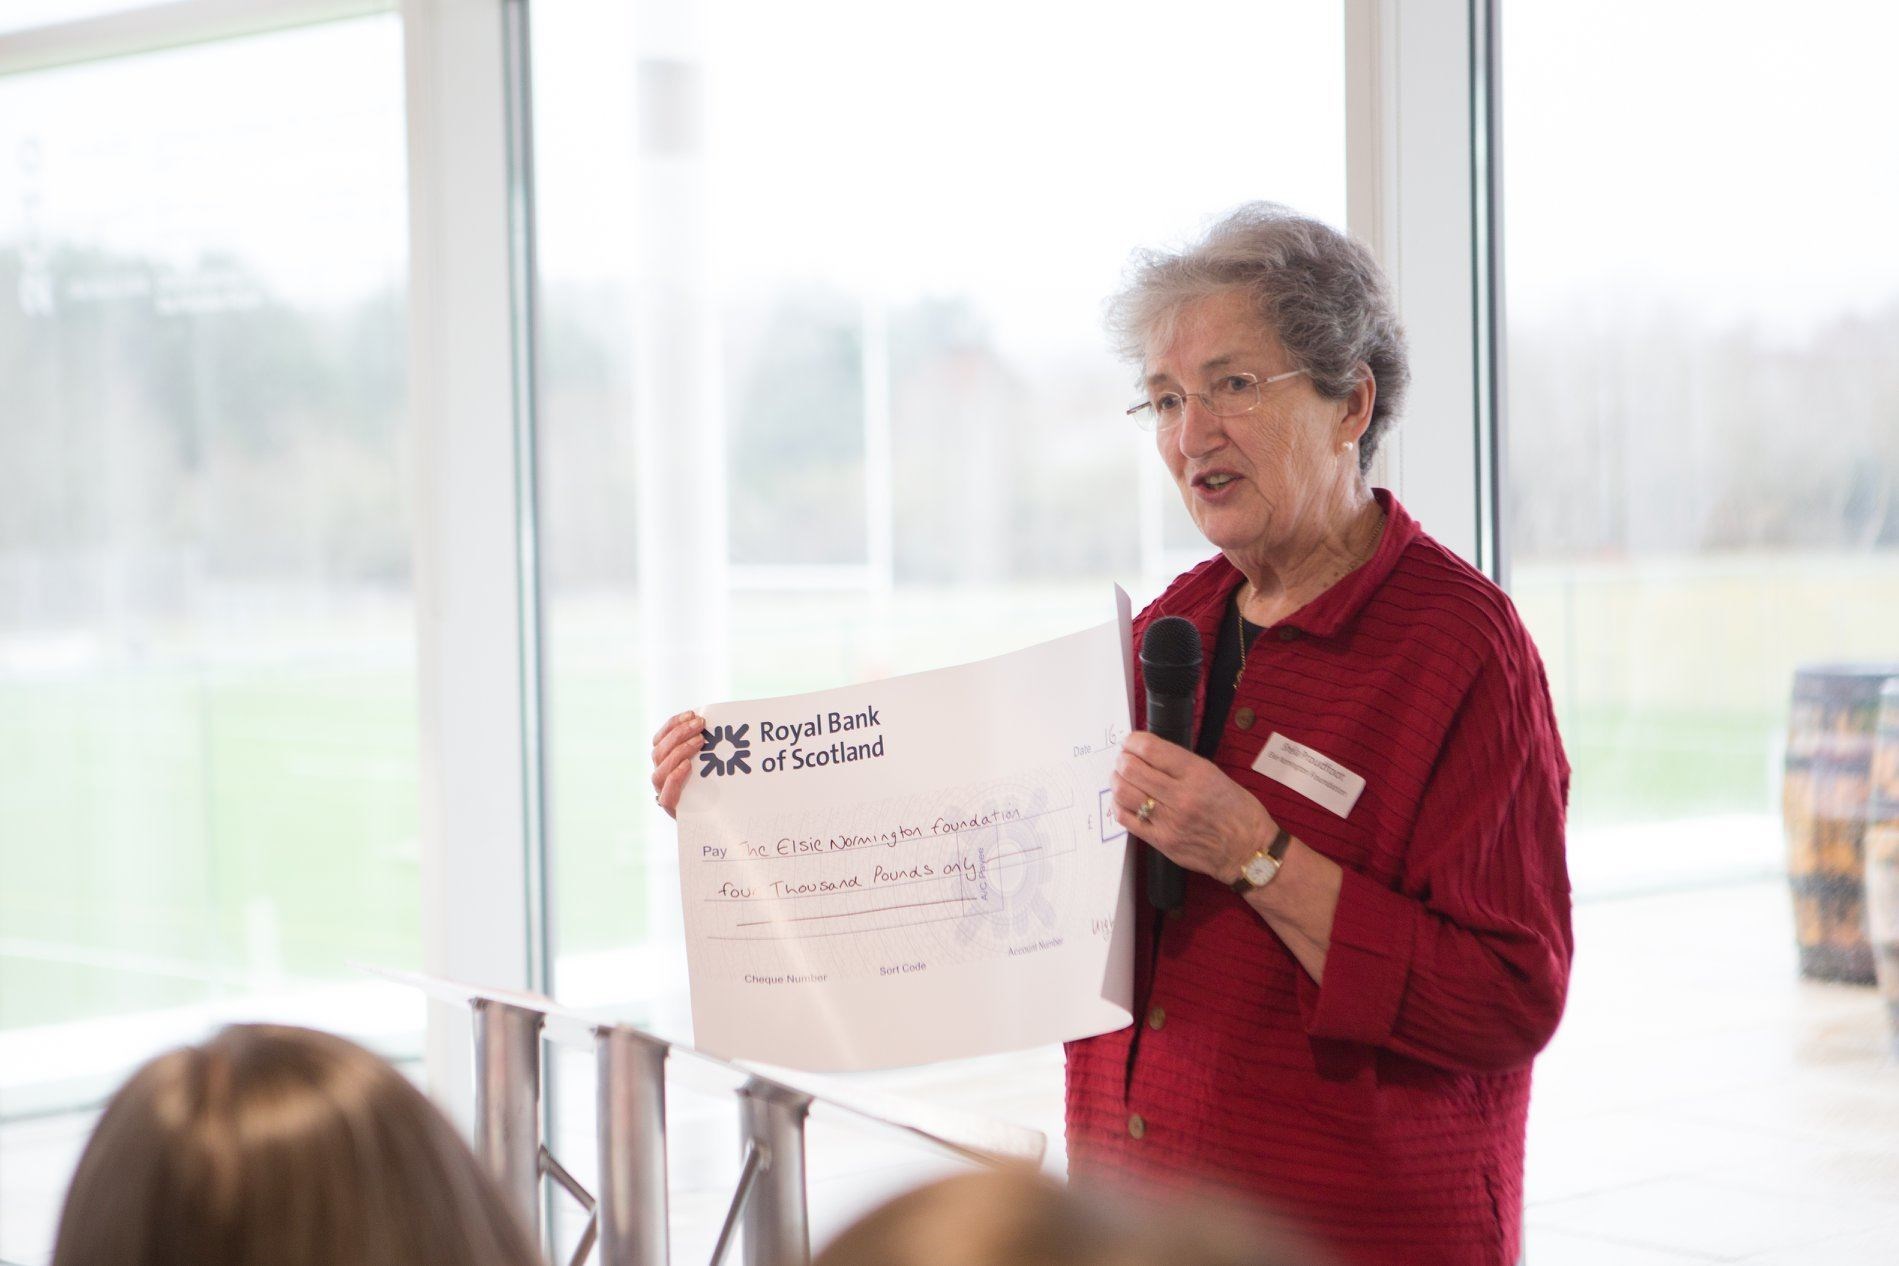 Sheila Proudfoot of the Elsie Normington Foundation making her pitch to HBW members for support last year.